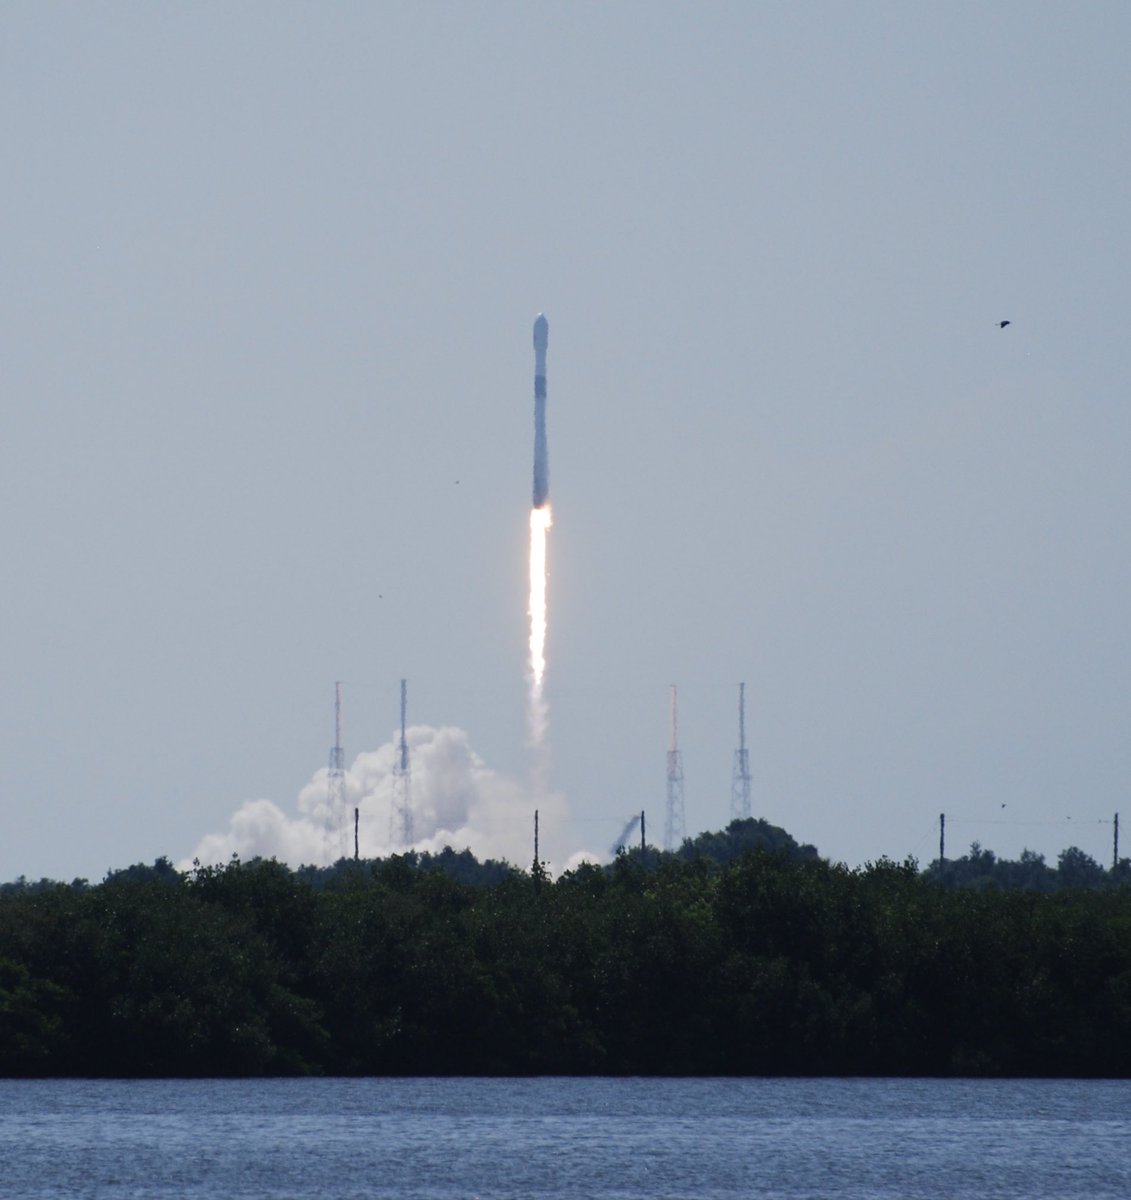 Here’s a much better picture of the #ESAEuclid launch. Some of the fuzziness is shimmer from the heat!